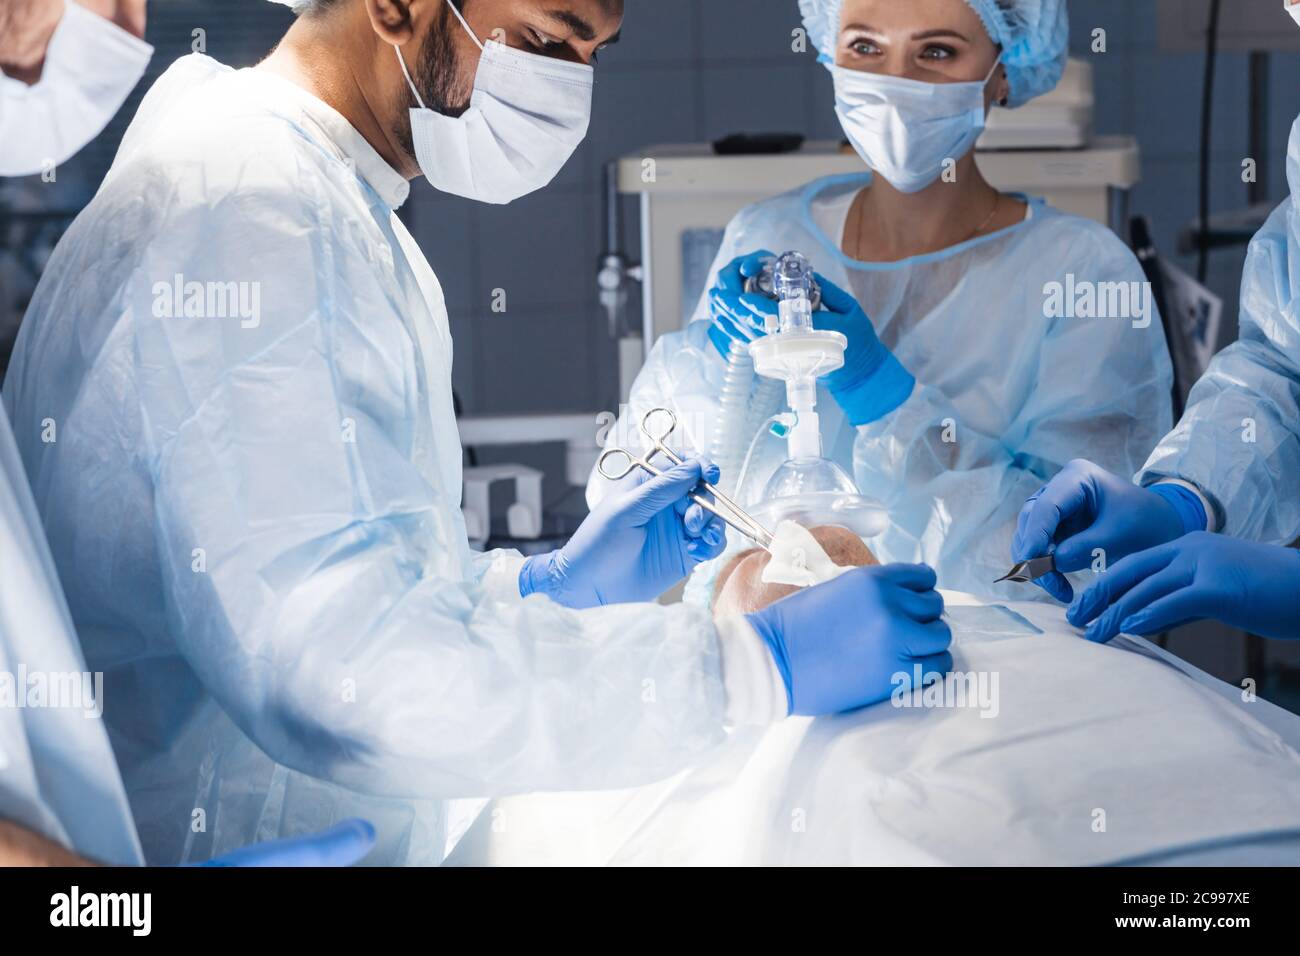 Pre oxygenation for general anesthesia. Surgery equipment, doctors in uniform and scrub cap on head being ready for operating Stock Photo